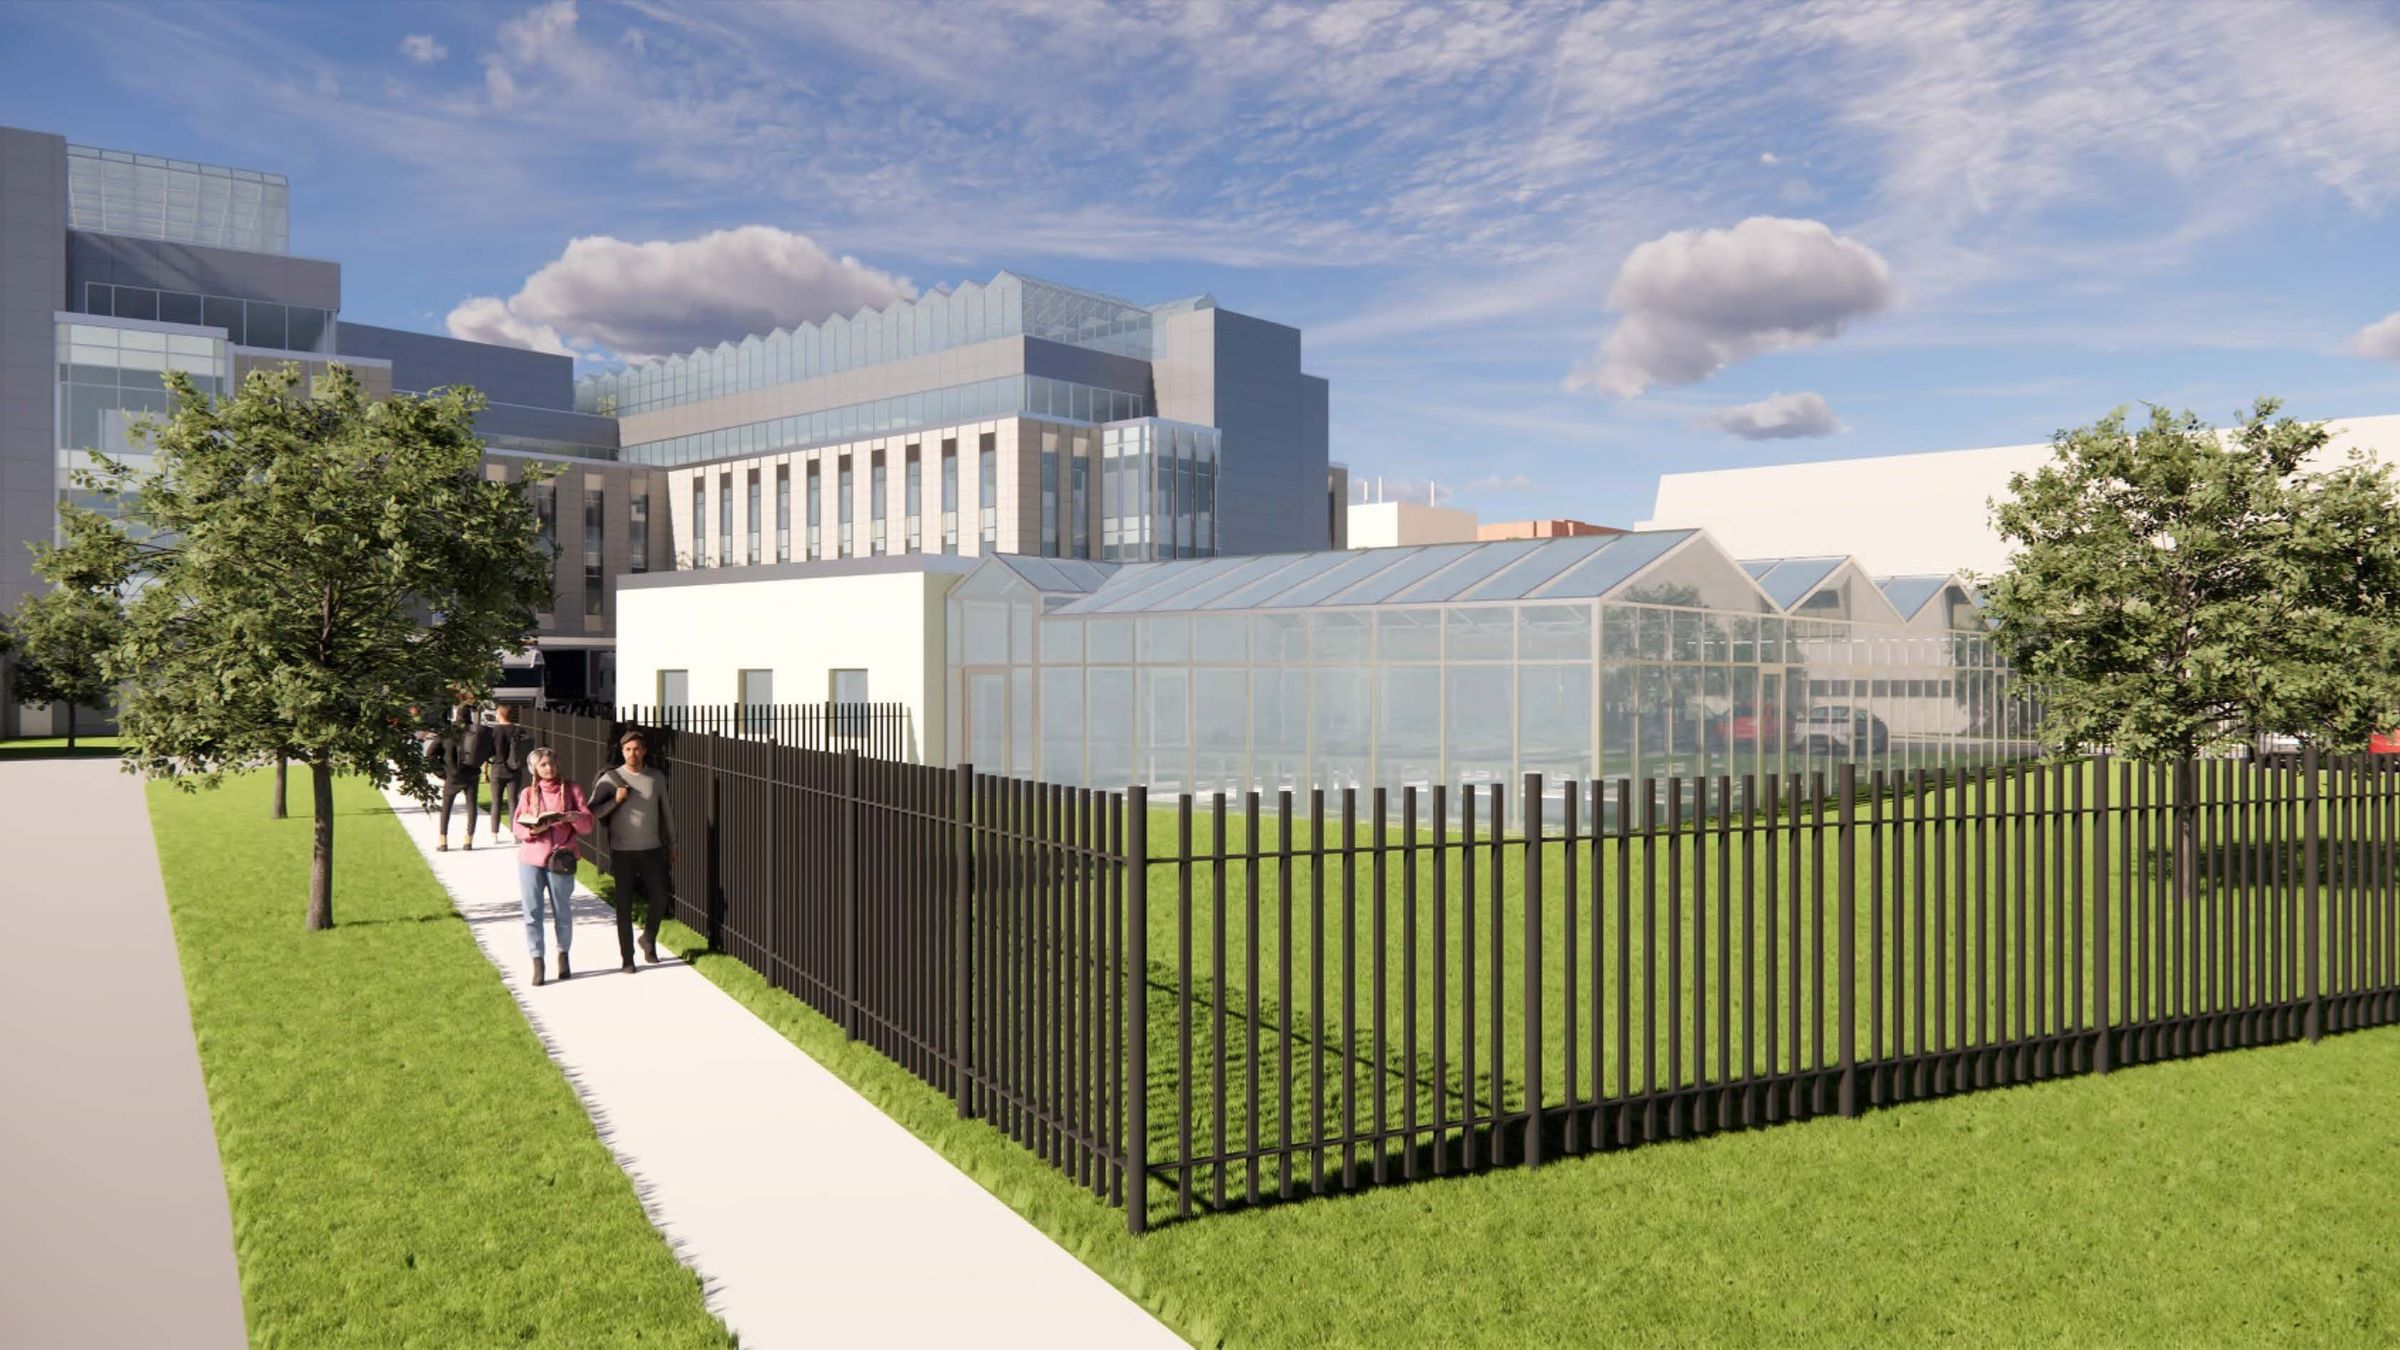 Greenhouses will provide additional teaching spaces, inside and outside of the building.